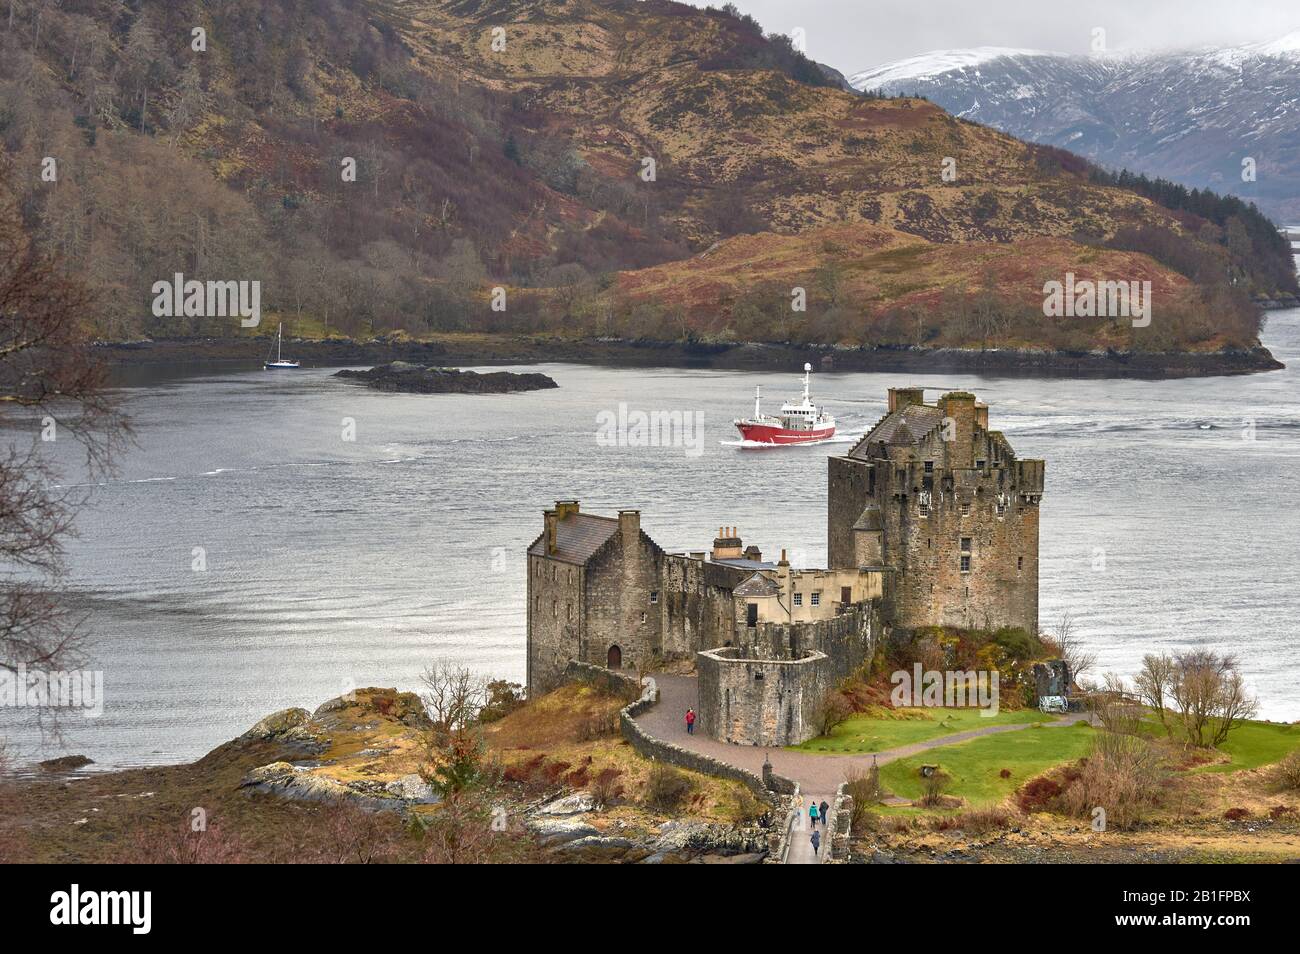 EILEAN DONAN CASTLE LOCH DUICH DORNIE SCOTLAND WINTER THE CASTLE OVERLOOKING THE WATERS OF THE LOCH WITH RED BOAT AND PEOPLE ON THE BRIDGE Stock Photo